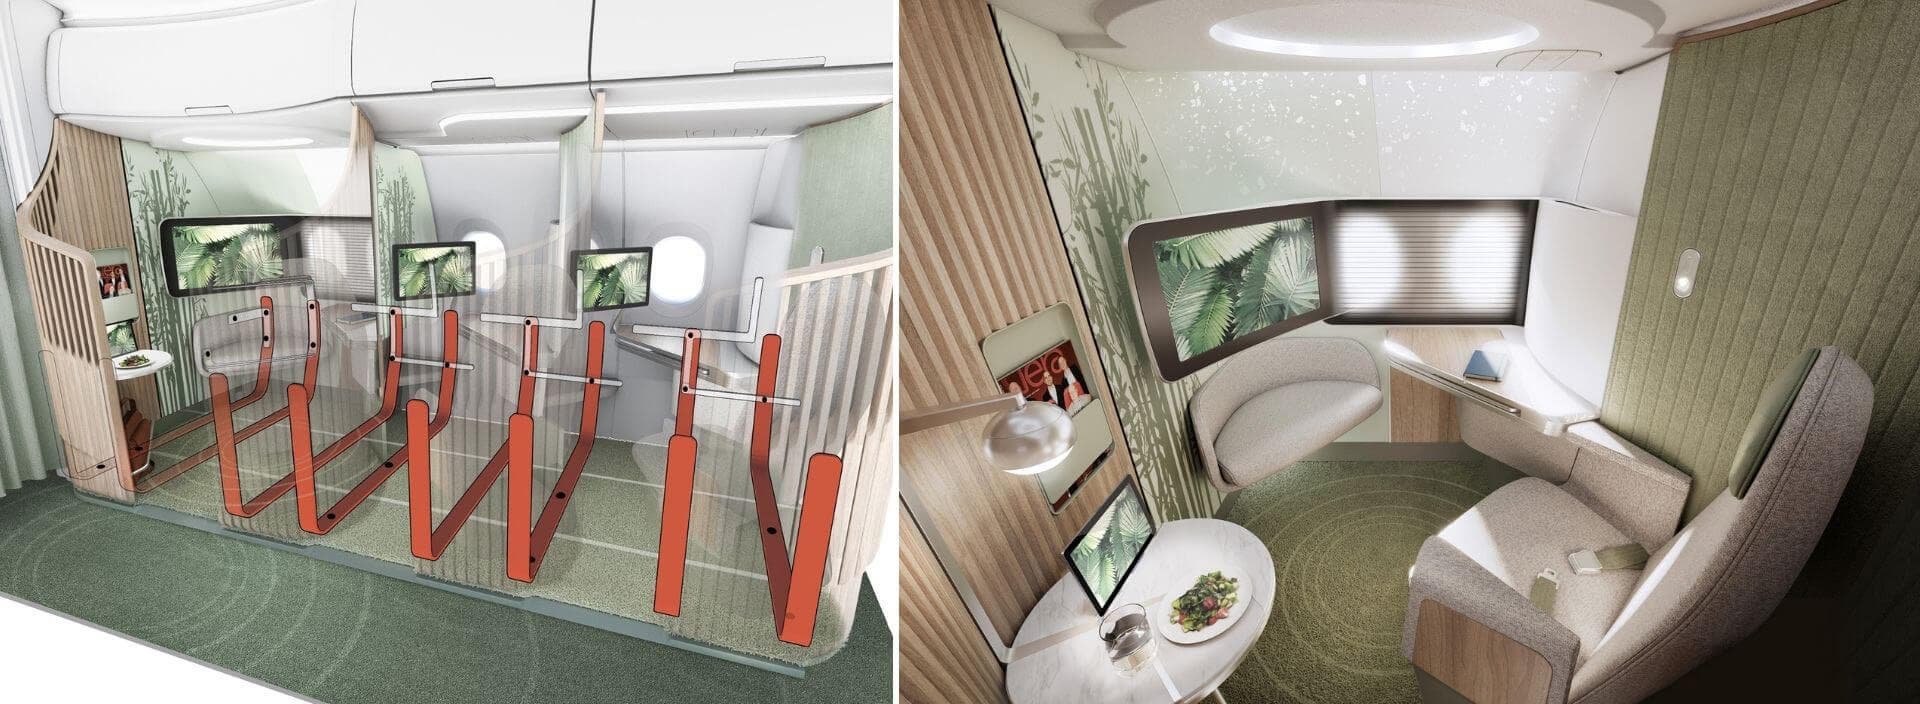 Elevate cabin concept internal structure reveal